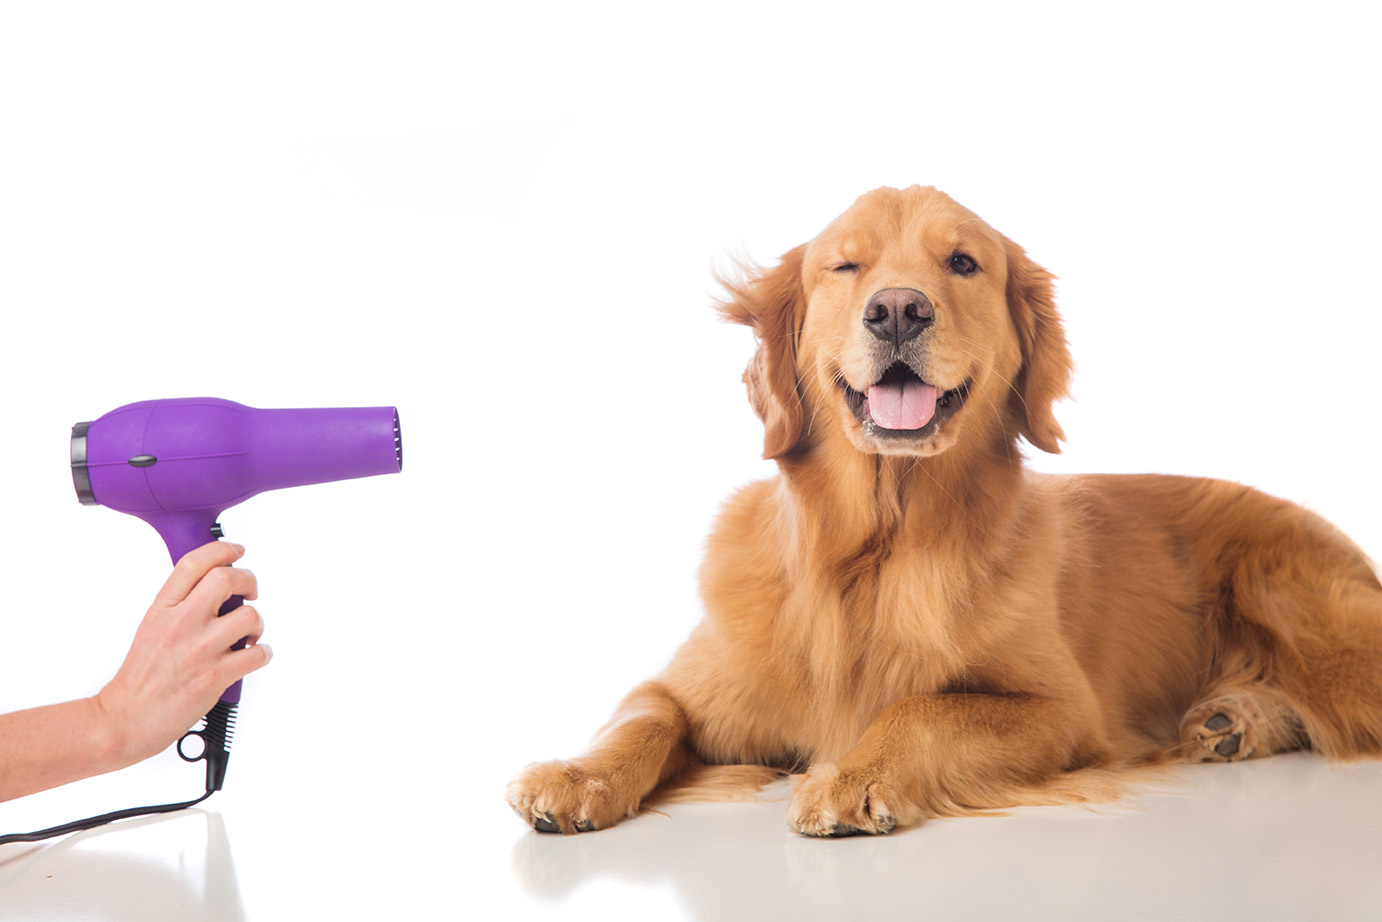 pet grooming products